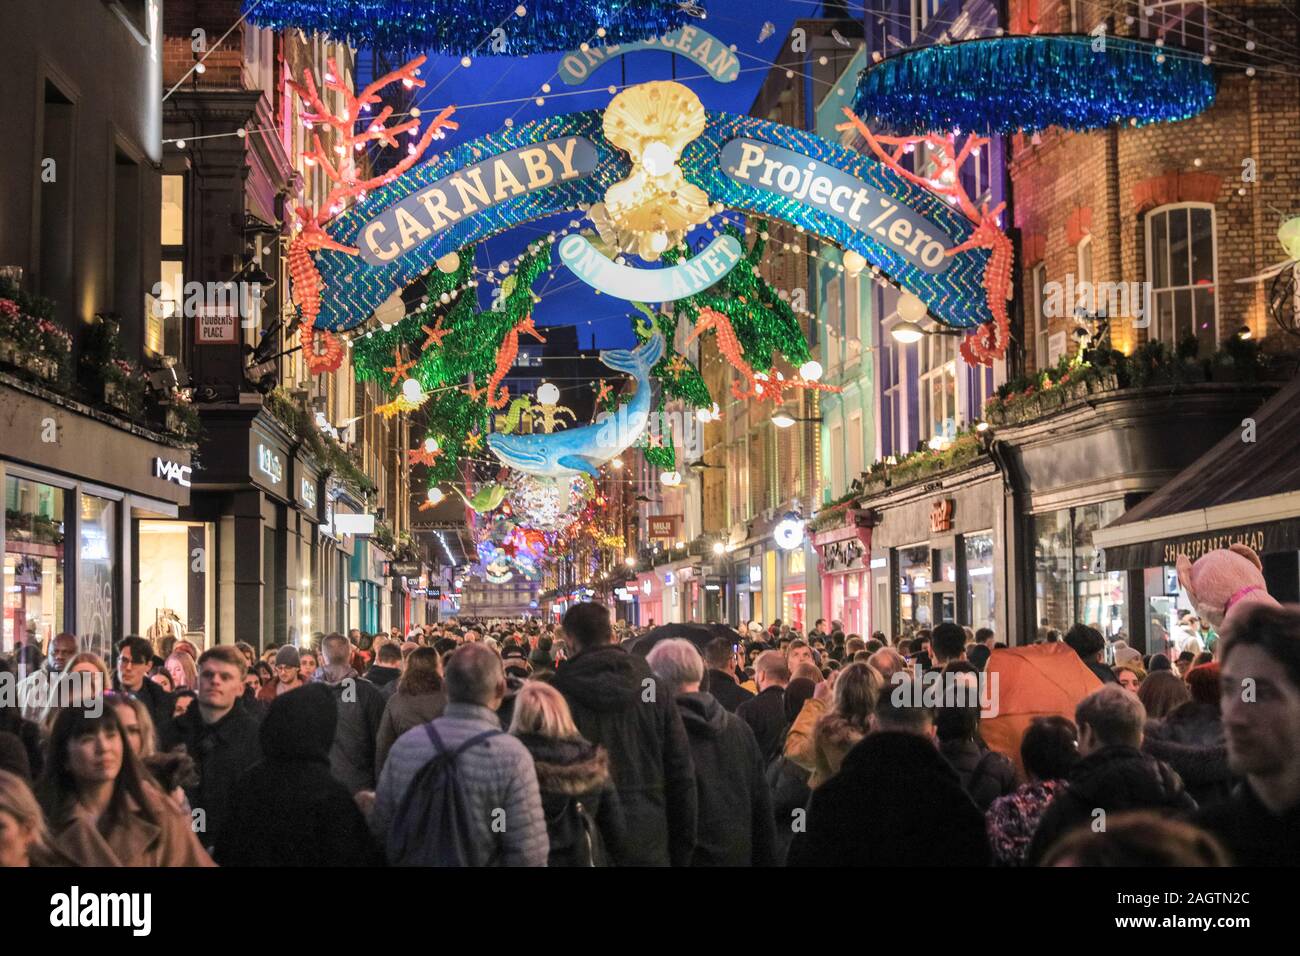 Central London, London, 21st Dec 2019. Carnaby Street is crowded with shoppers. Shoppers in Oxford Street, Regent Street and Bond Street rush to make their last minute purchases in time for Christmas, whilst shops have already started heavy discounting on many goods. Stock Photo